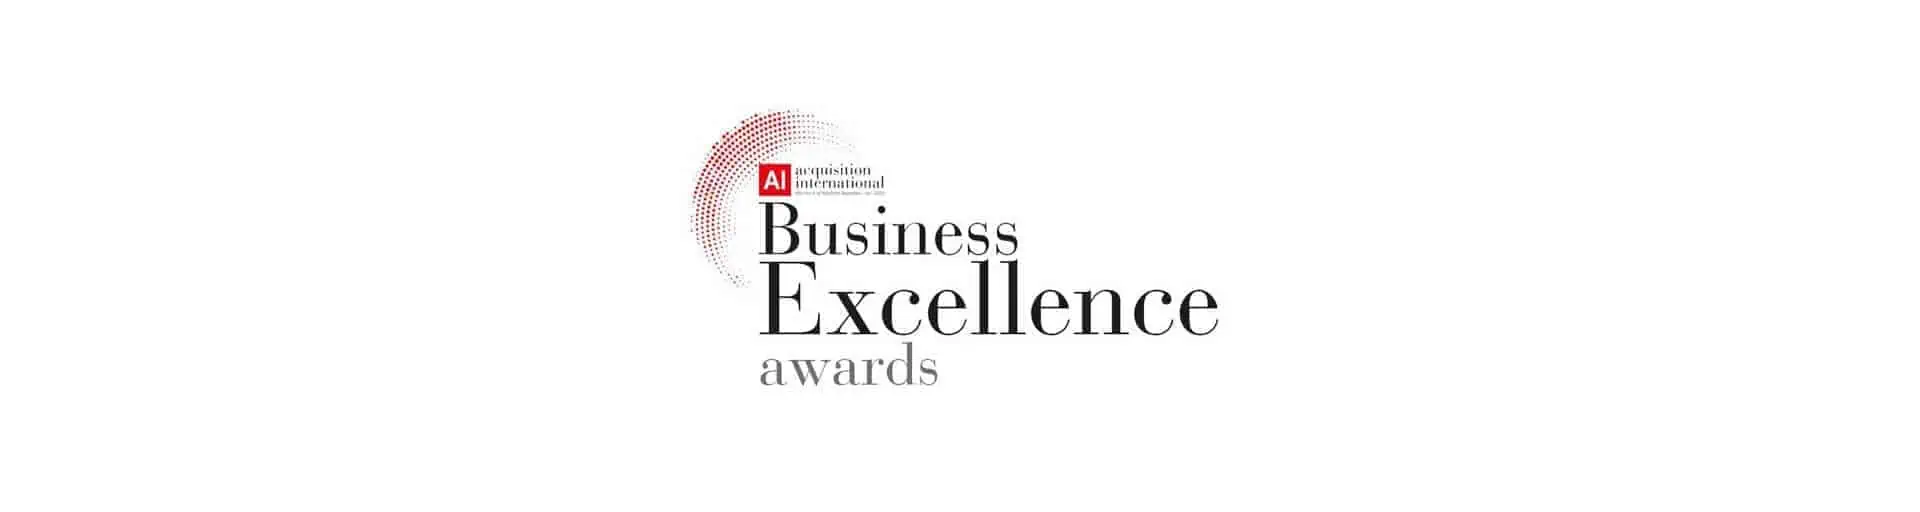 NBH : winner of Business Excellence awards 2020